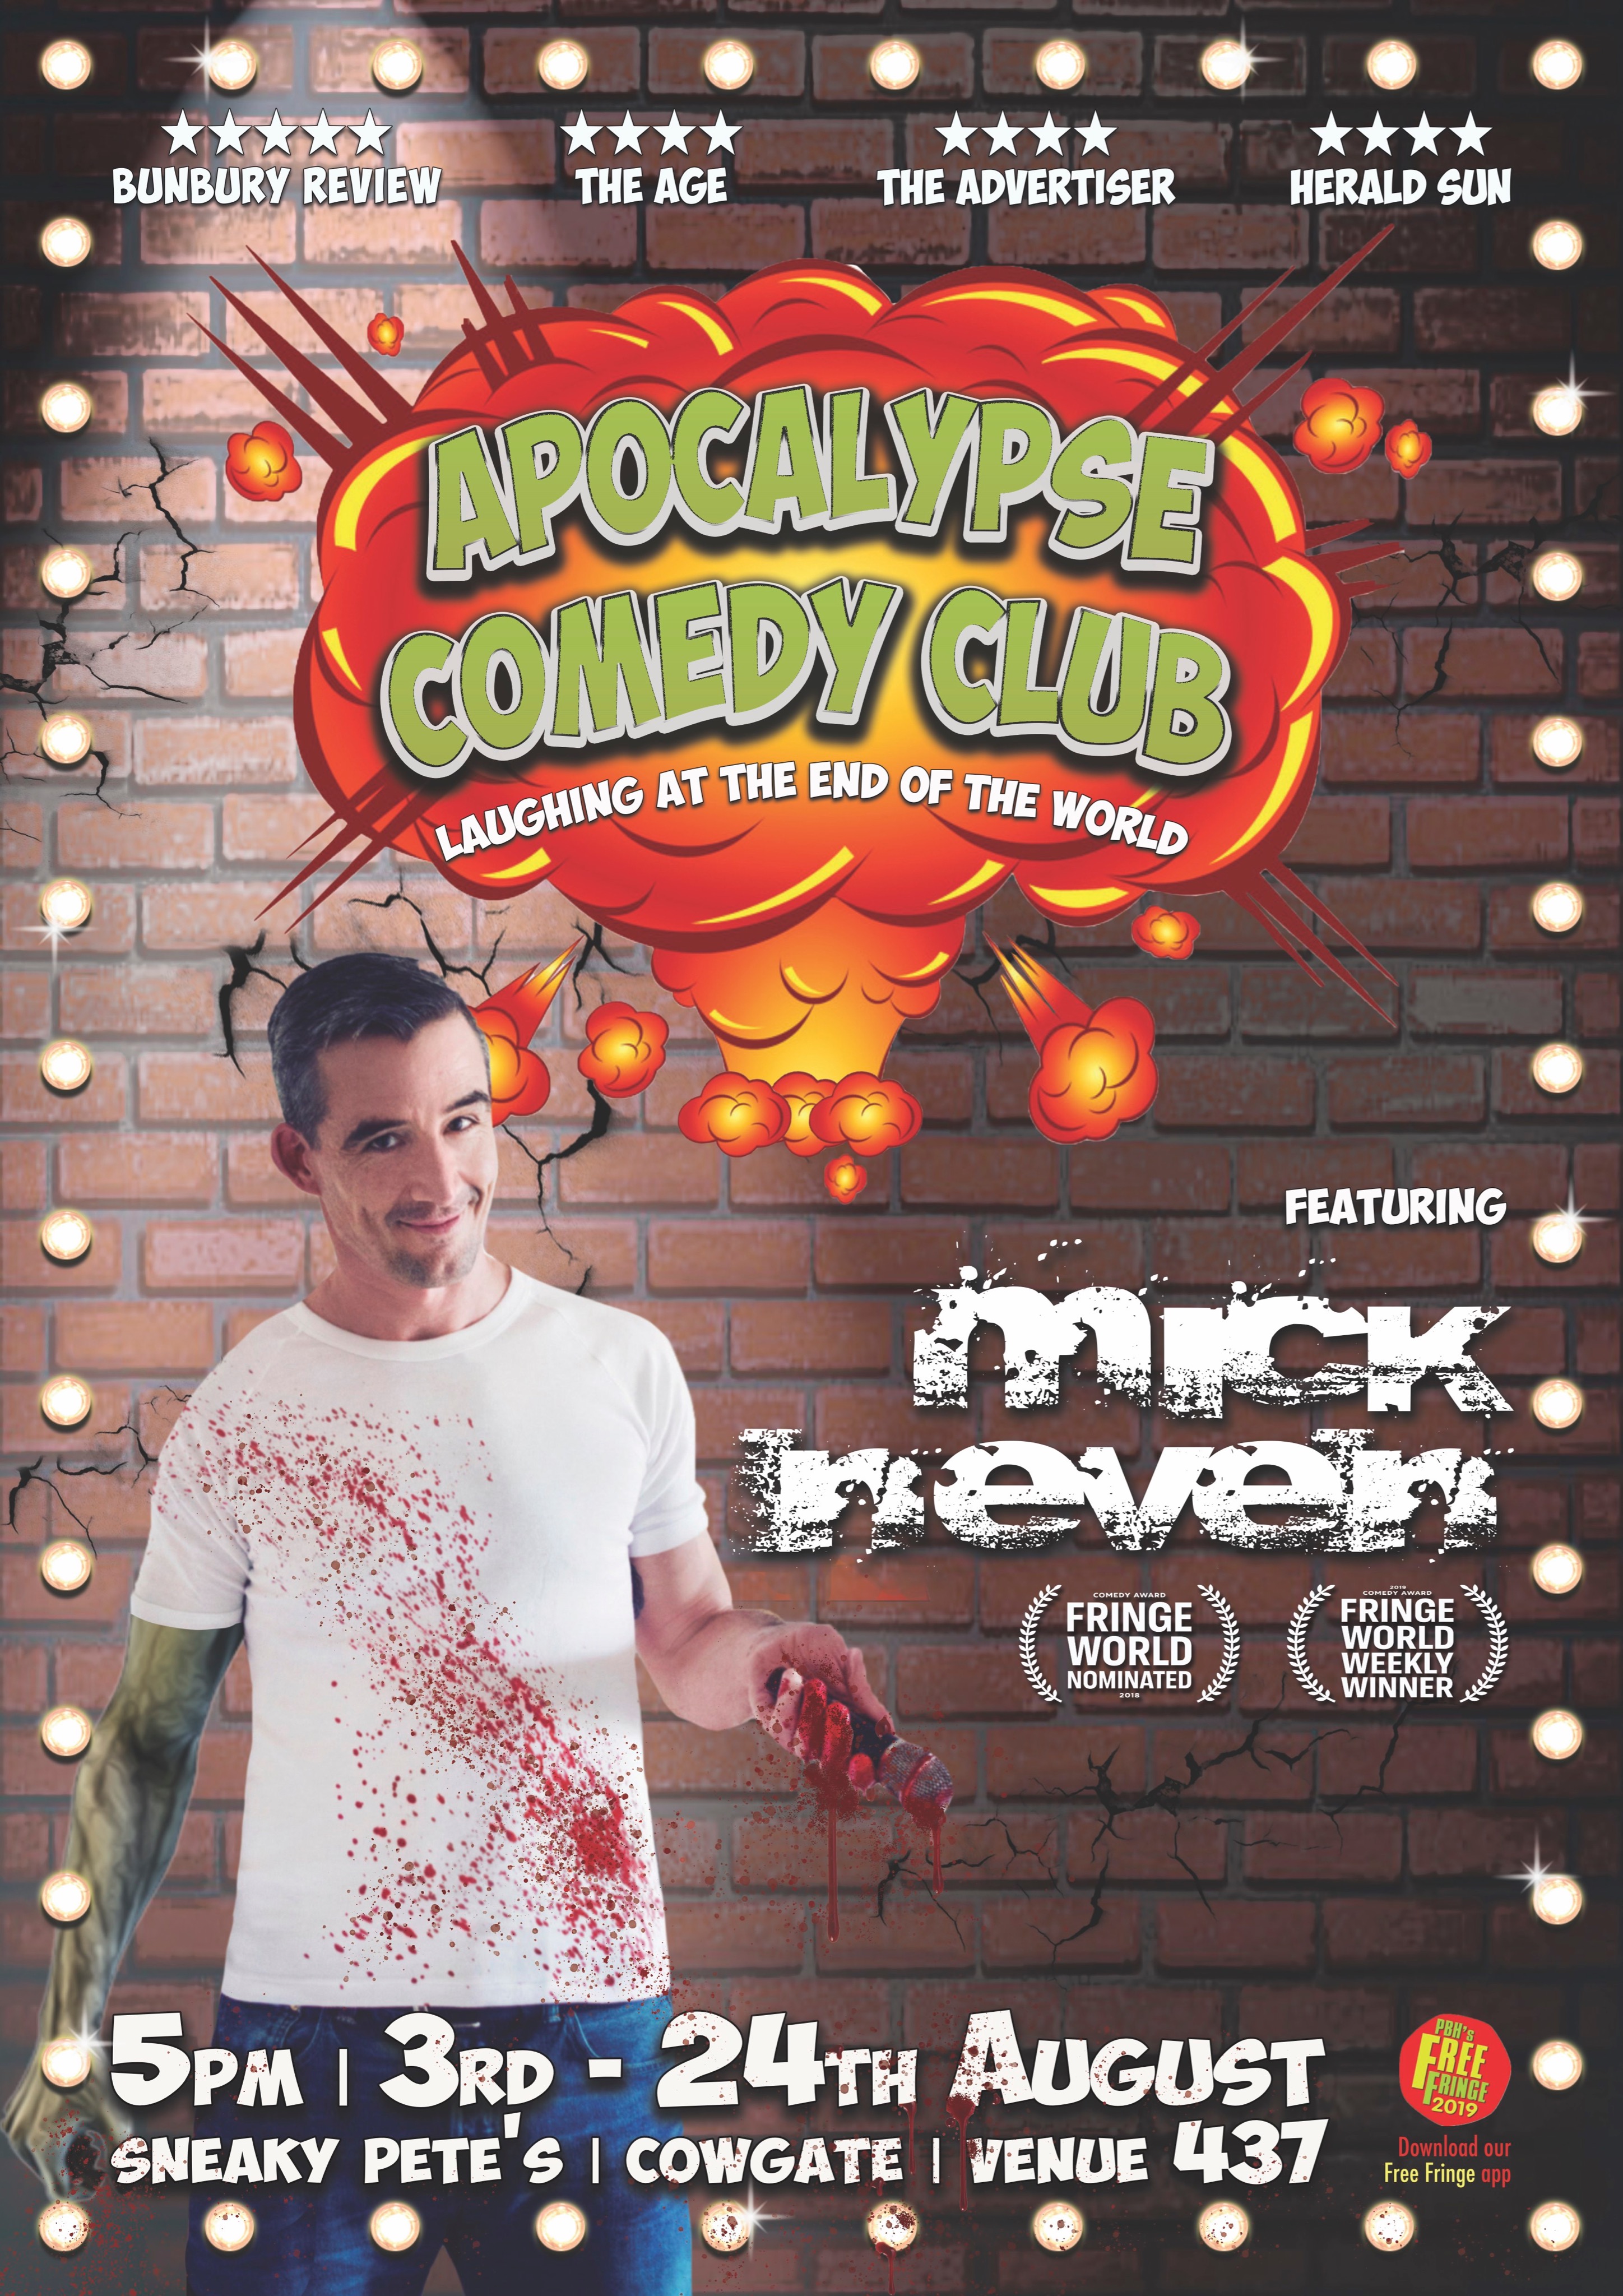 The poster for Apocalypse Comedy Club Featuring Mick Neven